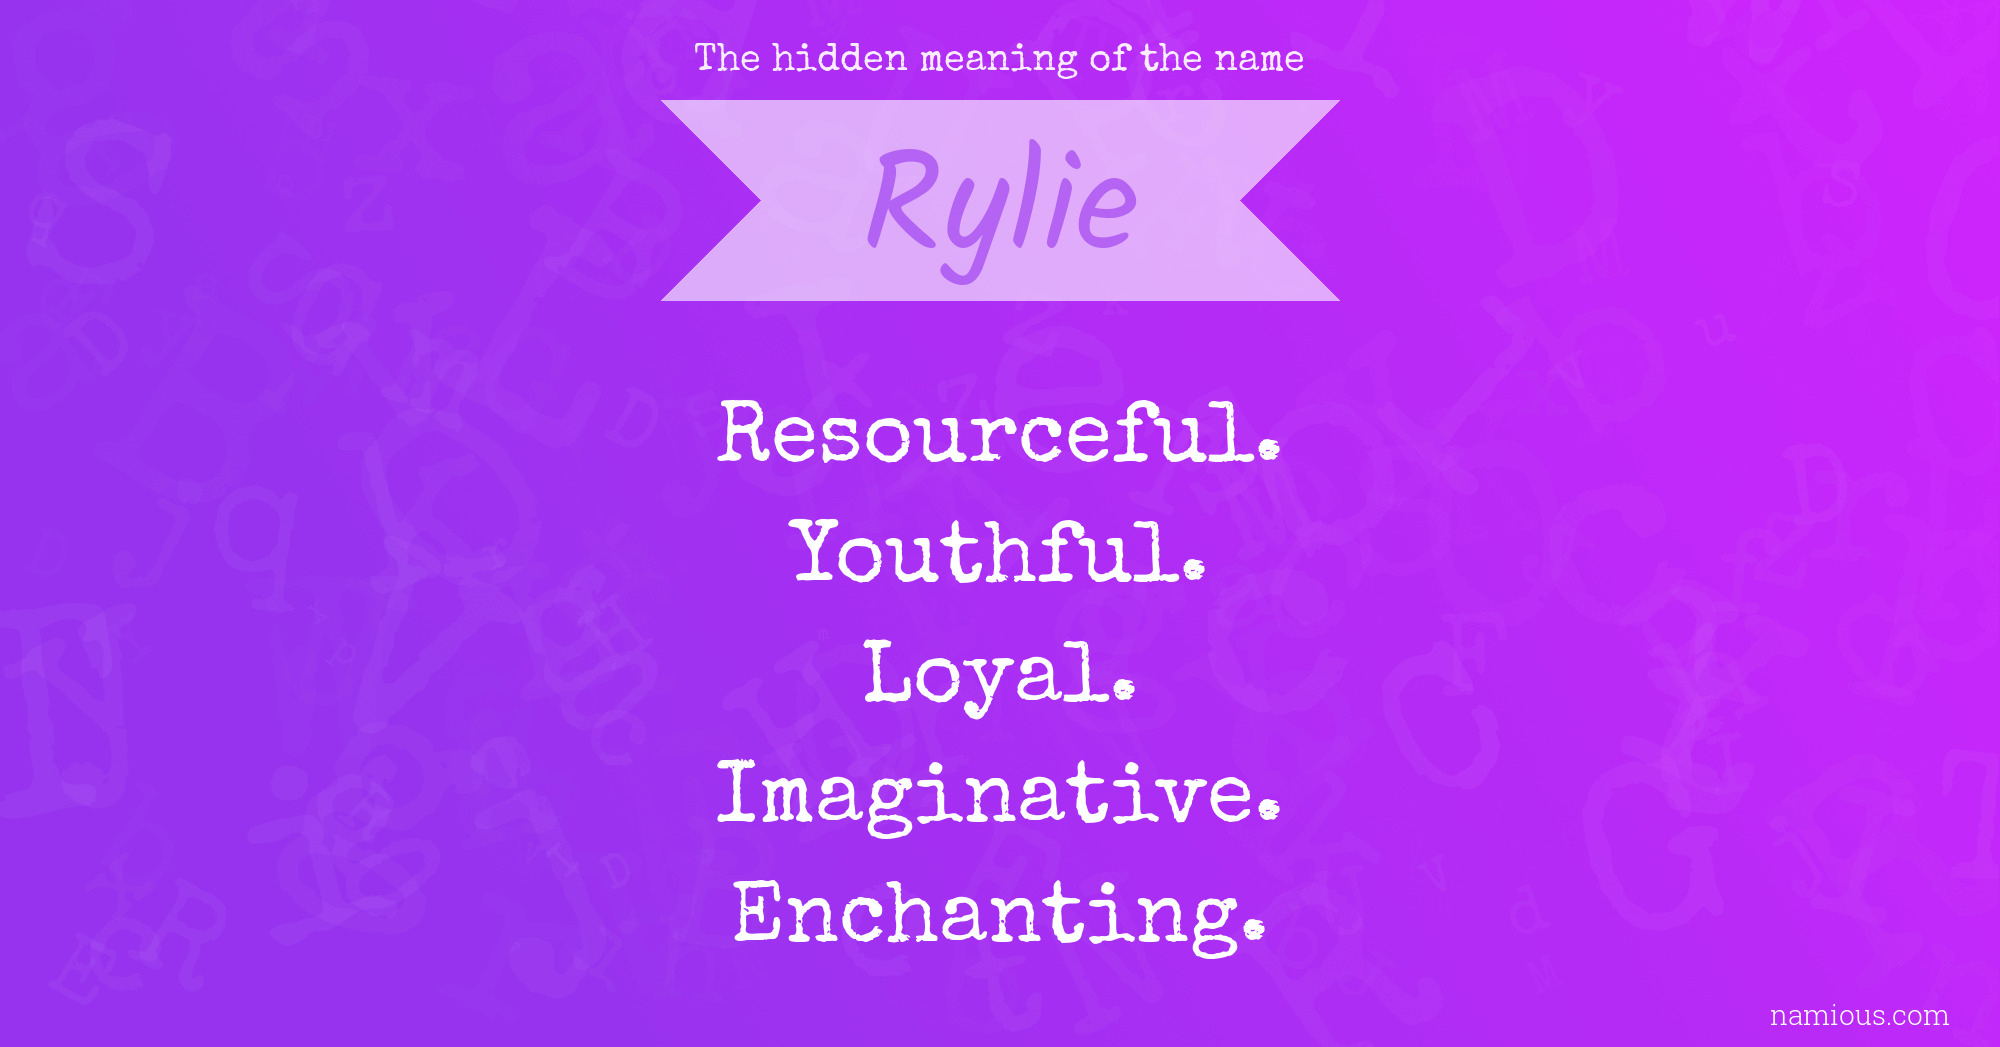 The hidden meaning of the name Rylie